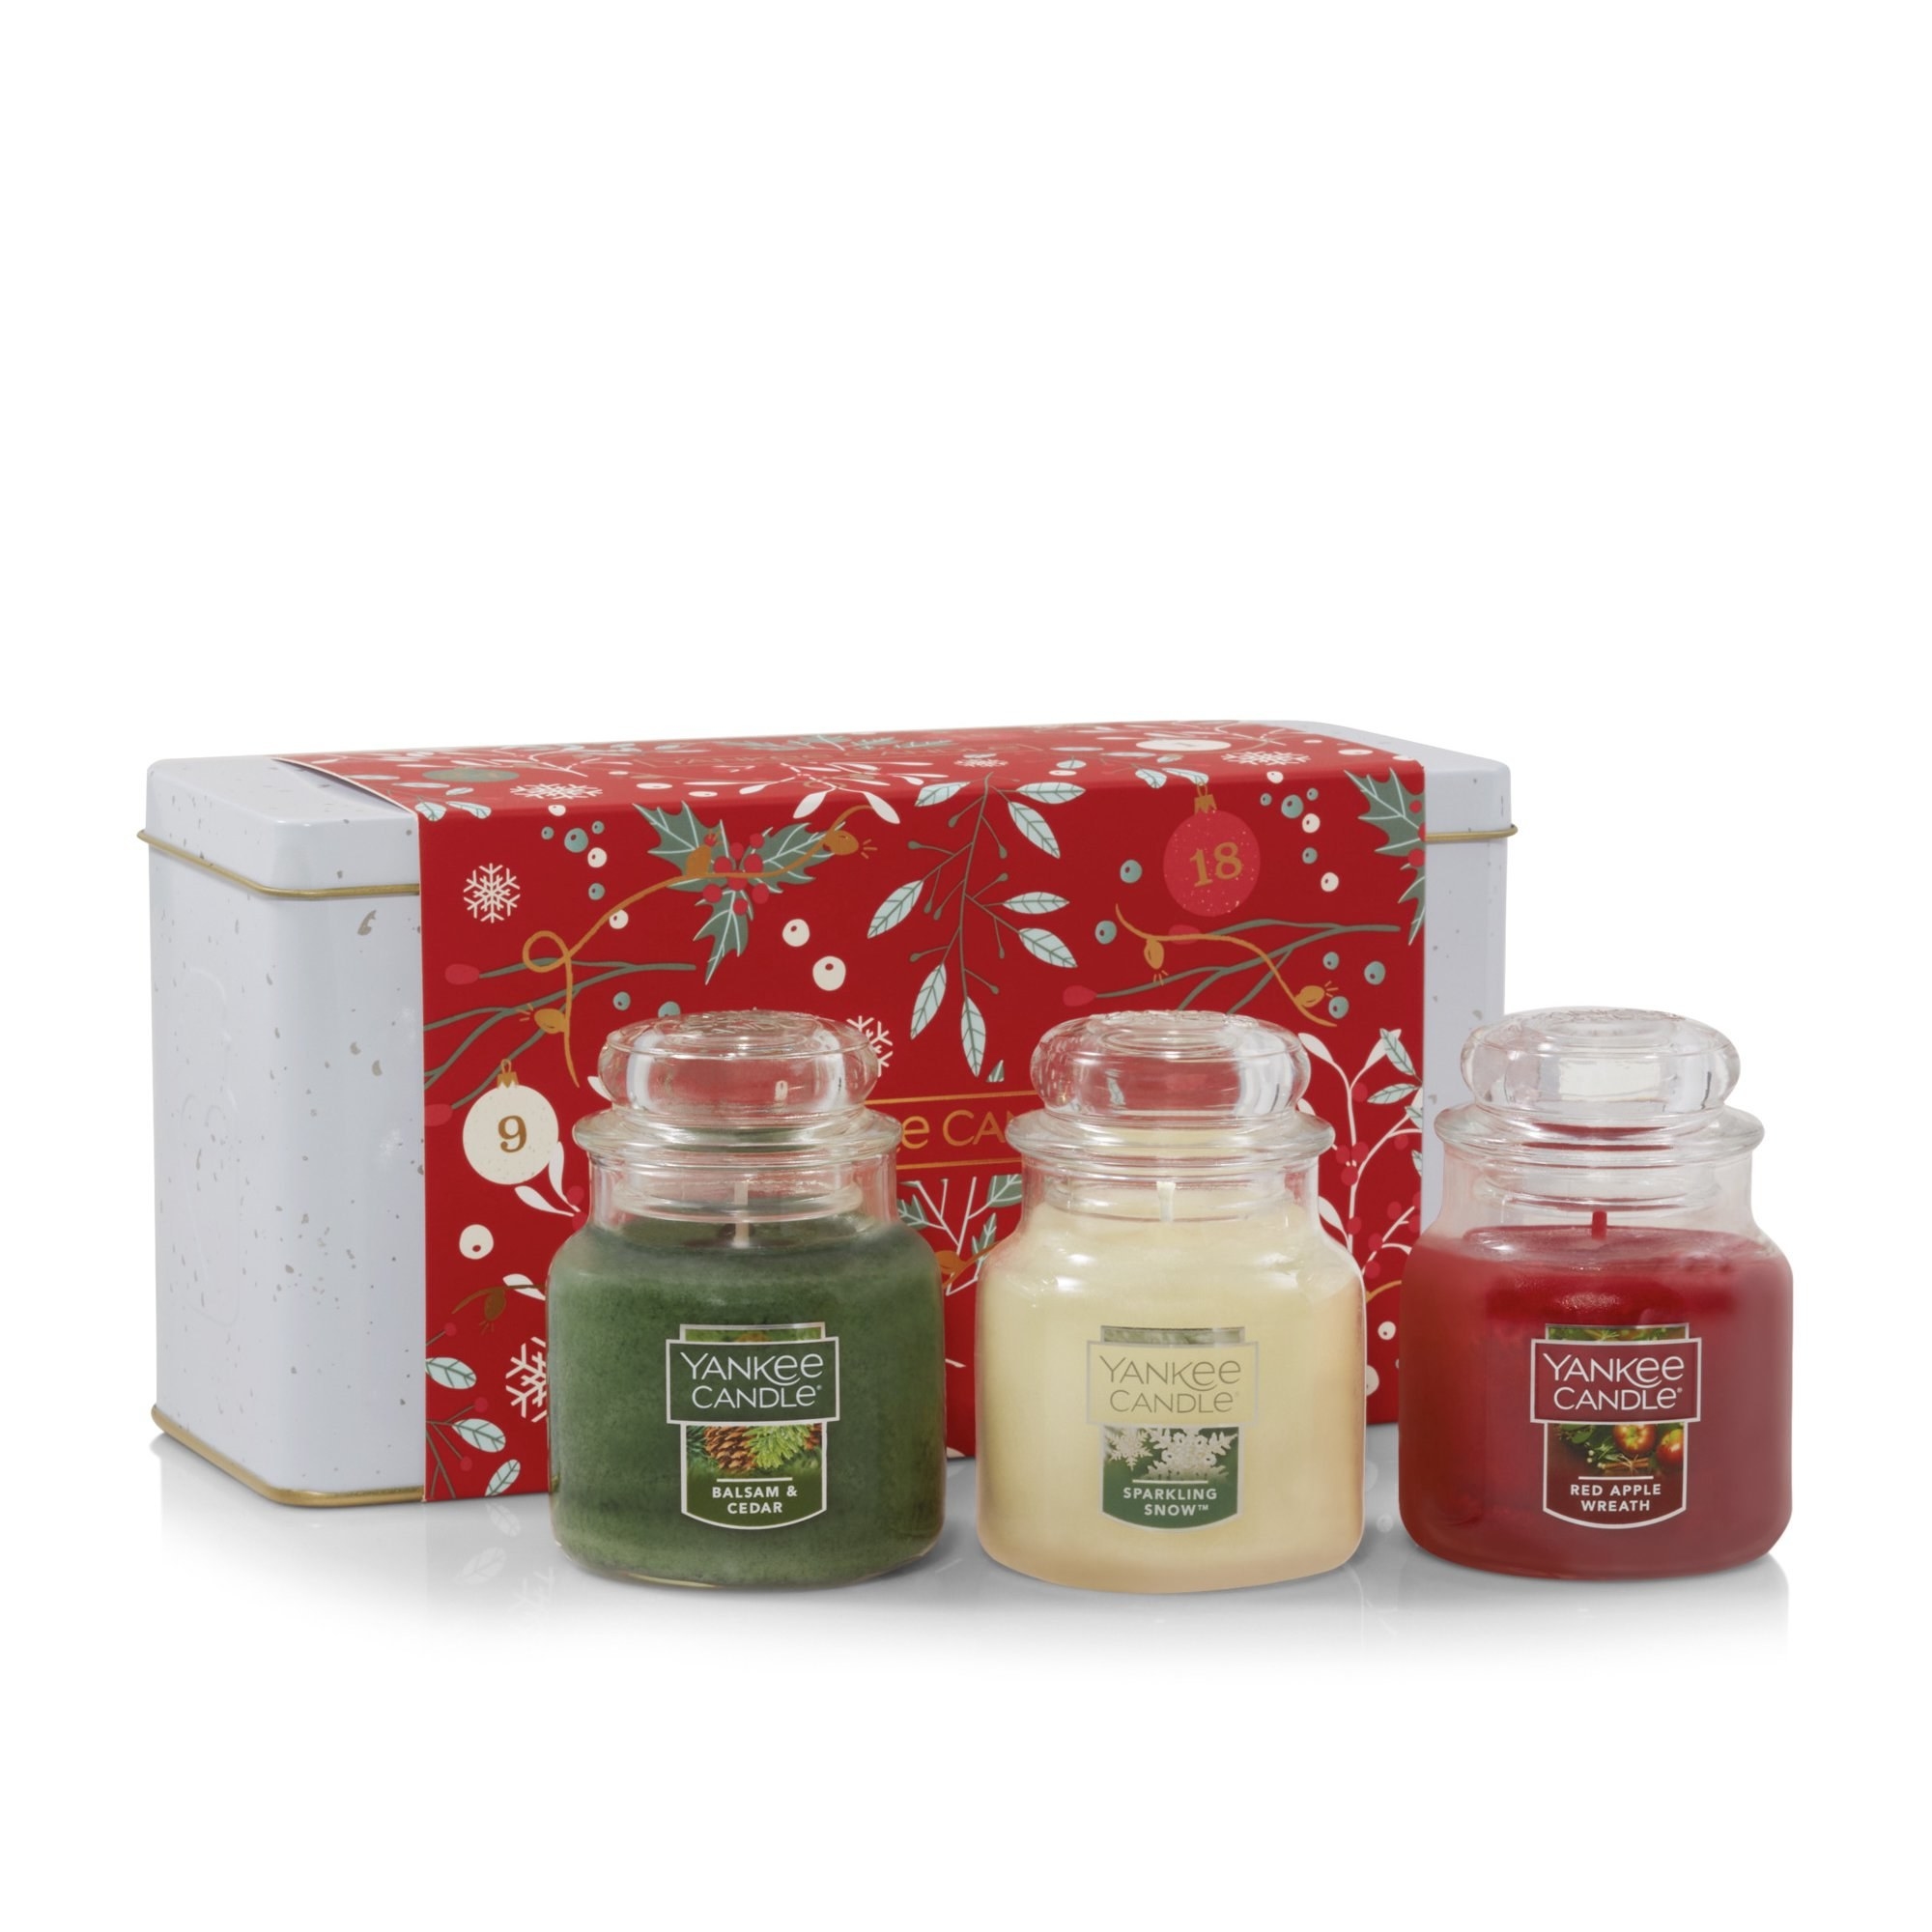 Three Yankee Candles displayed in front of the metal container they are packaged in: Balsam &amp;amp; Cedar, Sparkling Snow, and Red Apple Wreath